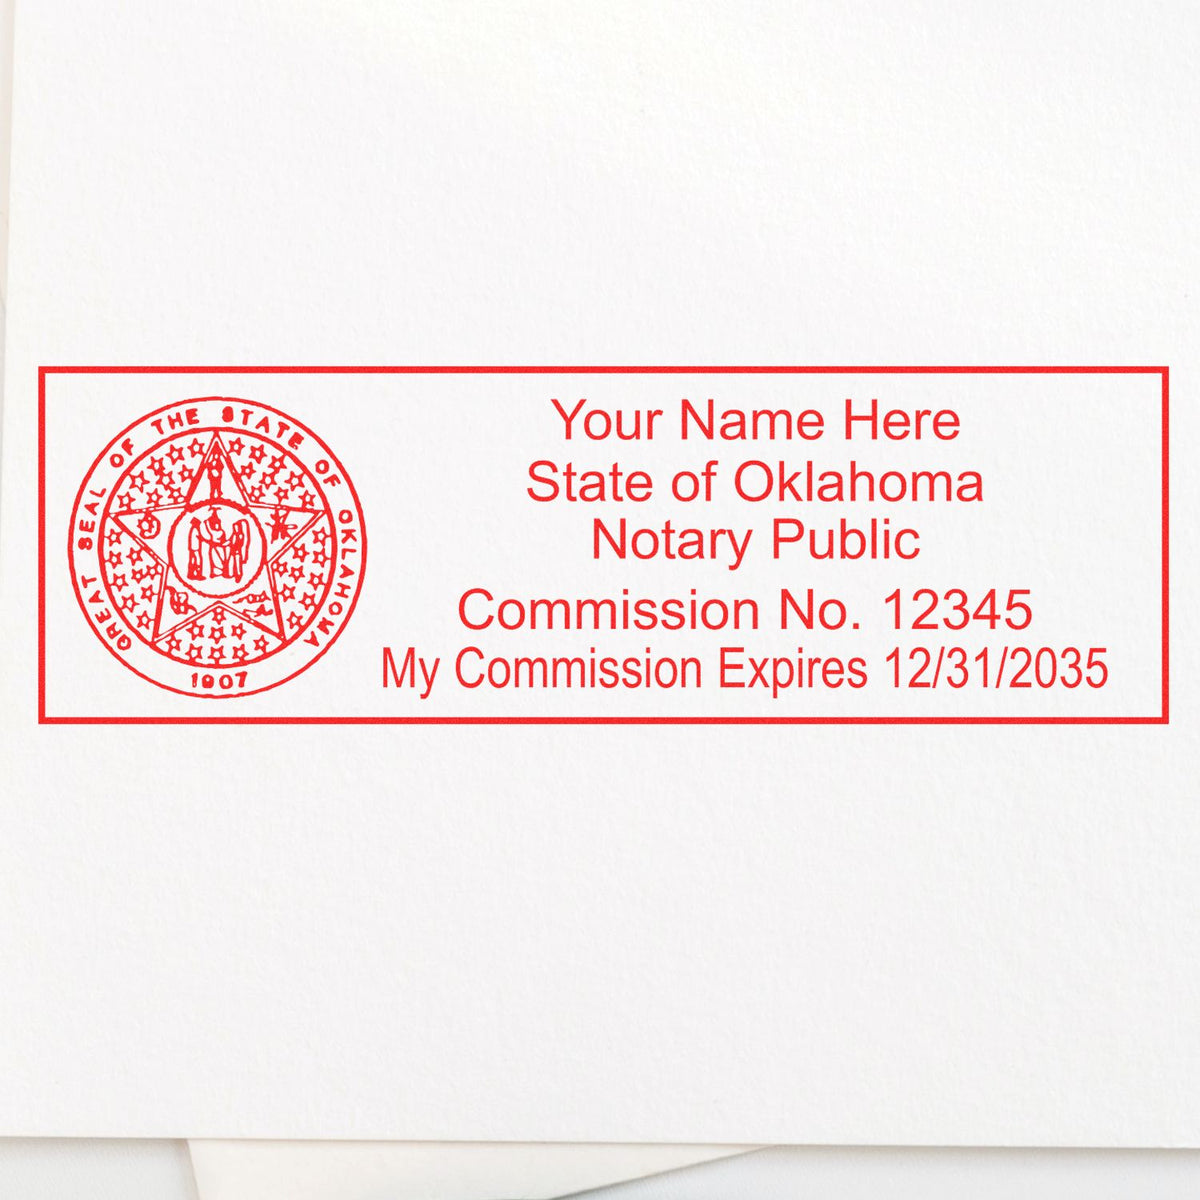 Another Example of a stamped impression of the Super Slim Oklahoma Notary Public Stamp on a piece of office paper.